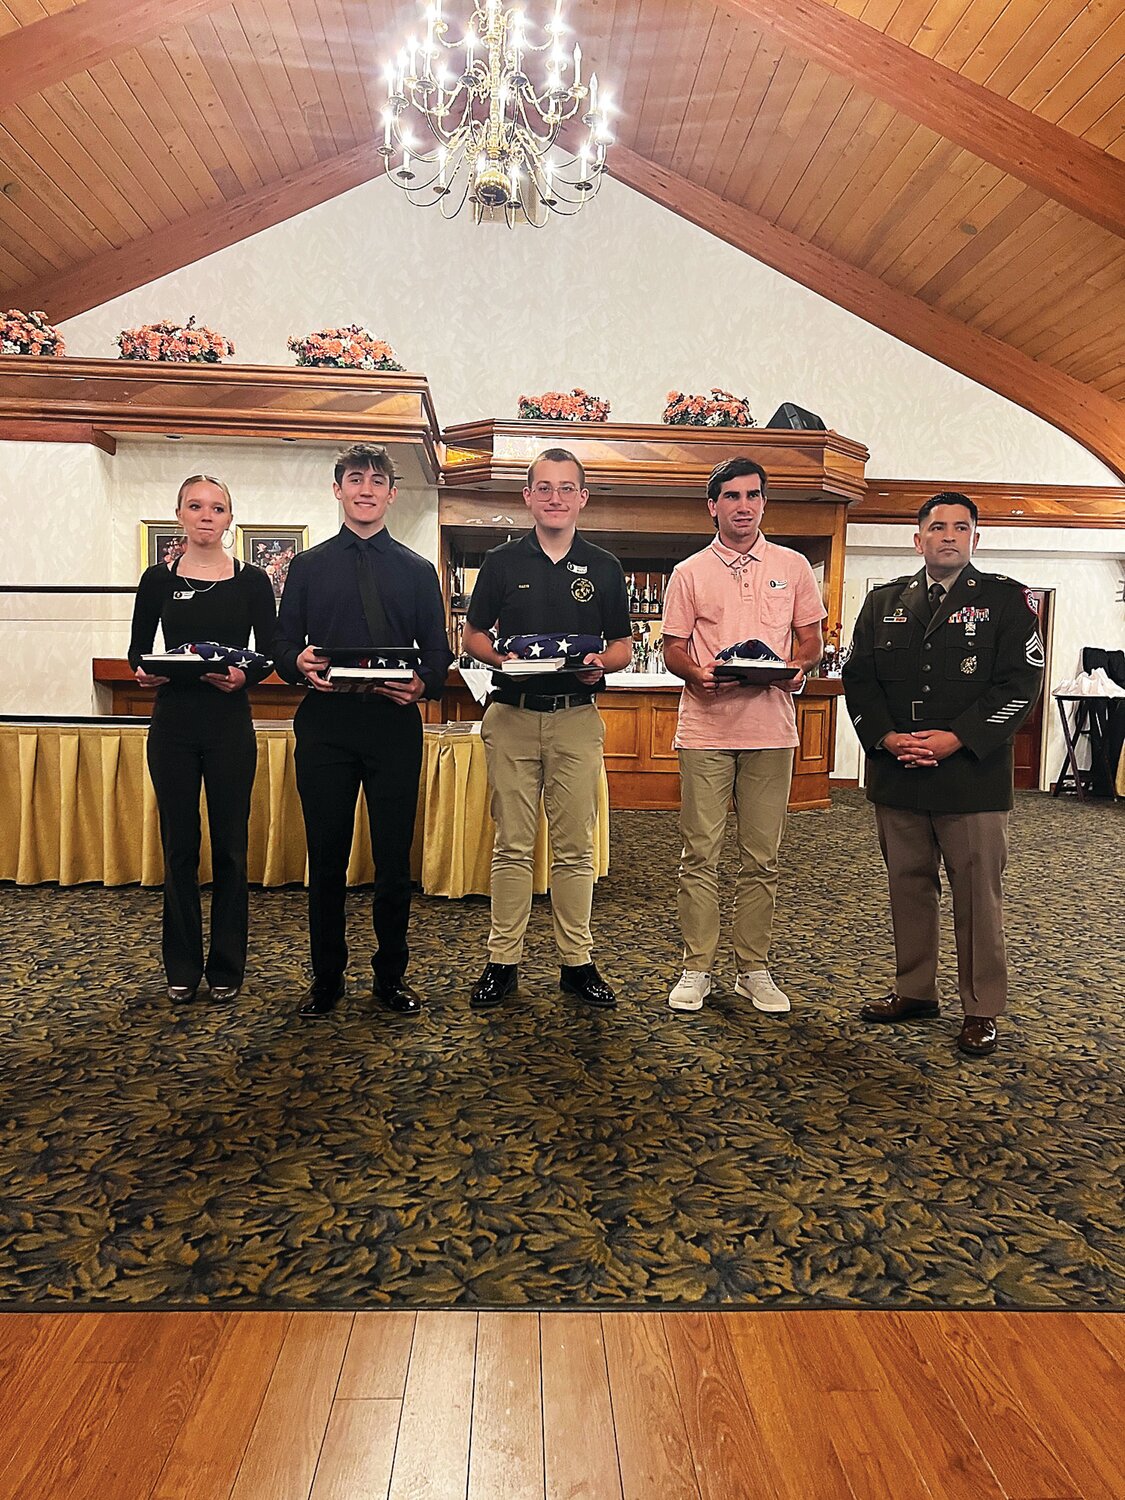 Bucks County Our Community Salutes hosted a student enlistee recognition program May 17. The event honors local high school seniors who are enlisting in the Armed Forces upon graduation.